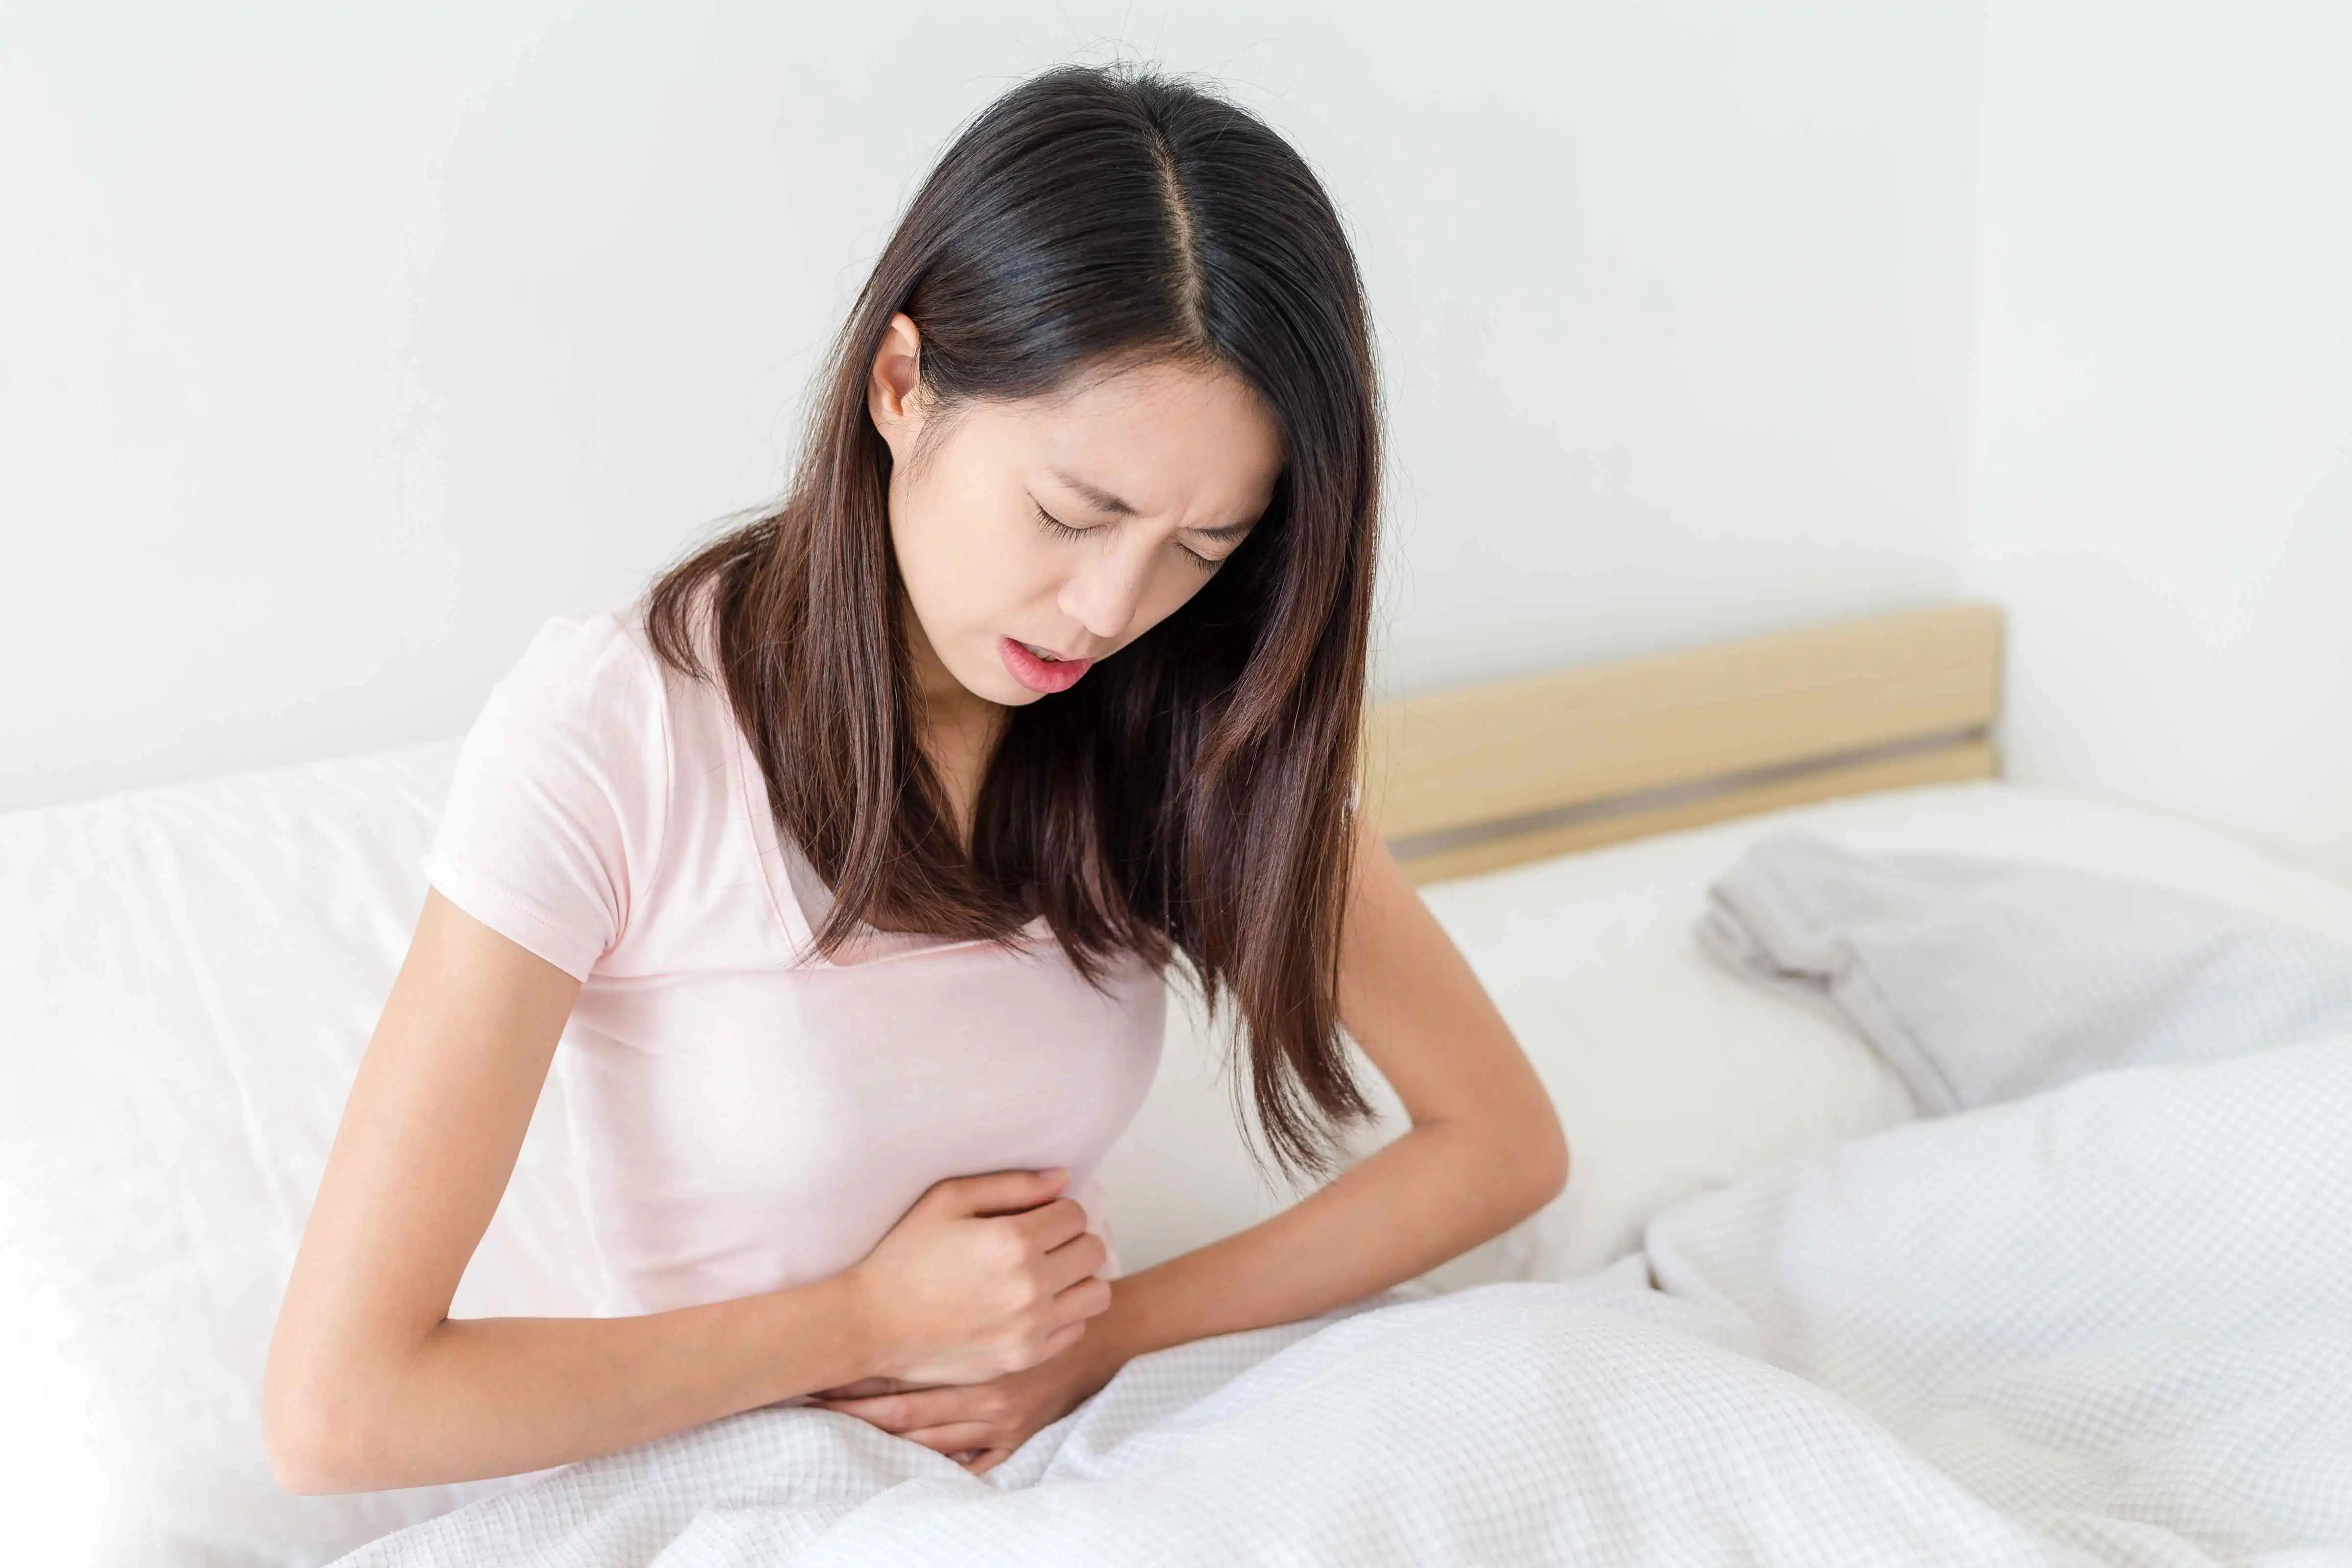 woman in stomach pain - How to know if the infection from your tooth abscess is spreading